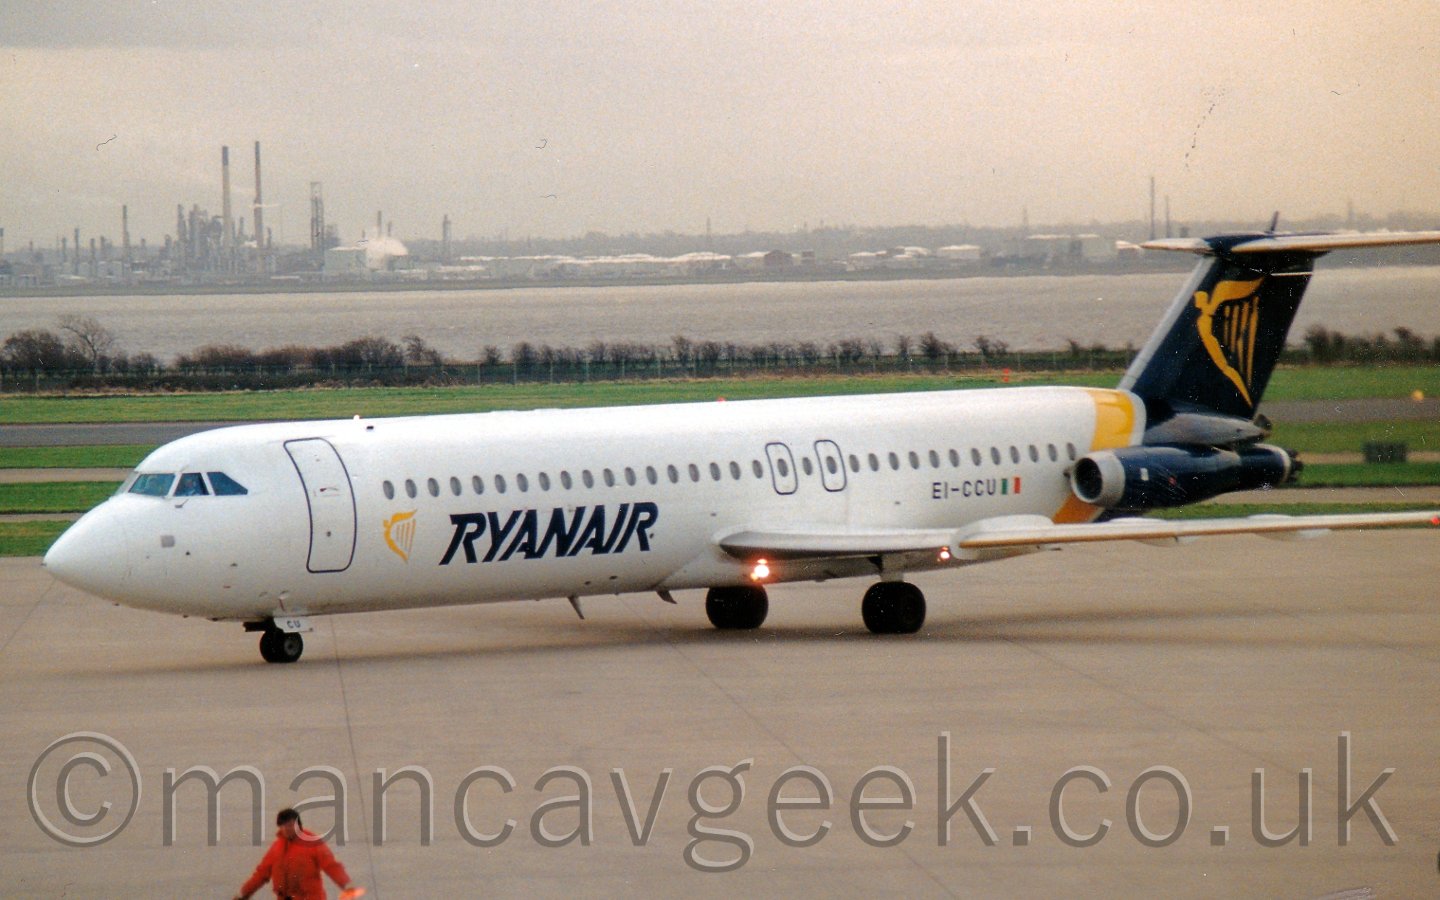 Side view of a T-tailed twin engined jet airliner with it's engines mounted on the rear fuselage. The plane is mostly white, with a diagonal yellow band around the rear fuselage, the end of the fuselage and tail being filled with a dark blue, with a winged golden Irish harp. There is another, smaller, harp on the lower forward fuselage, withlarge dark blue "Ryanair" titles. In the background, large areas of grass lead up to a wide river, with large scale industrial facilities on the far bank.